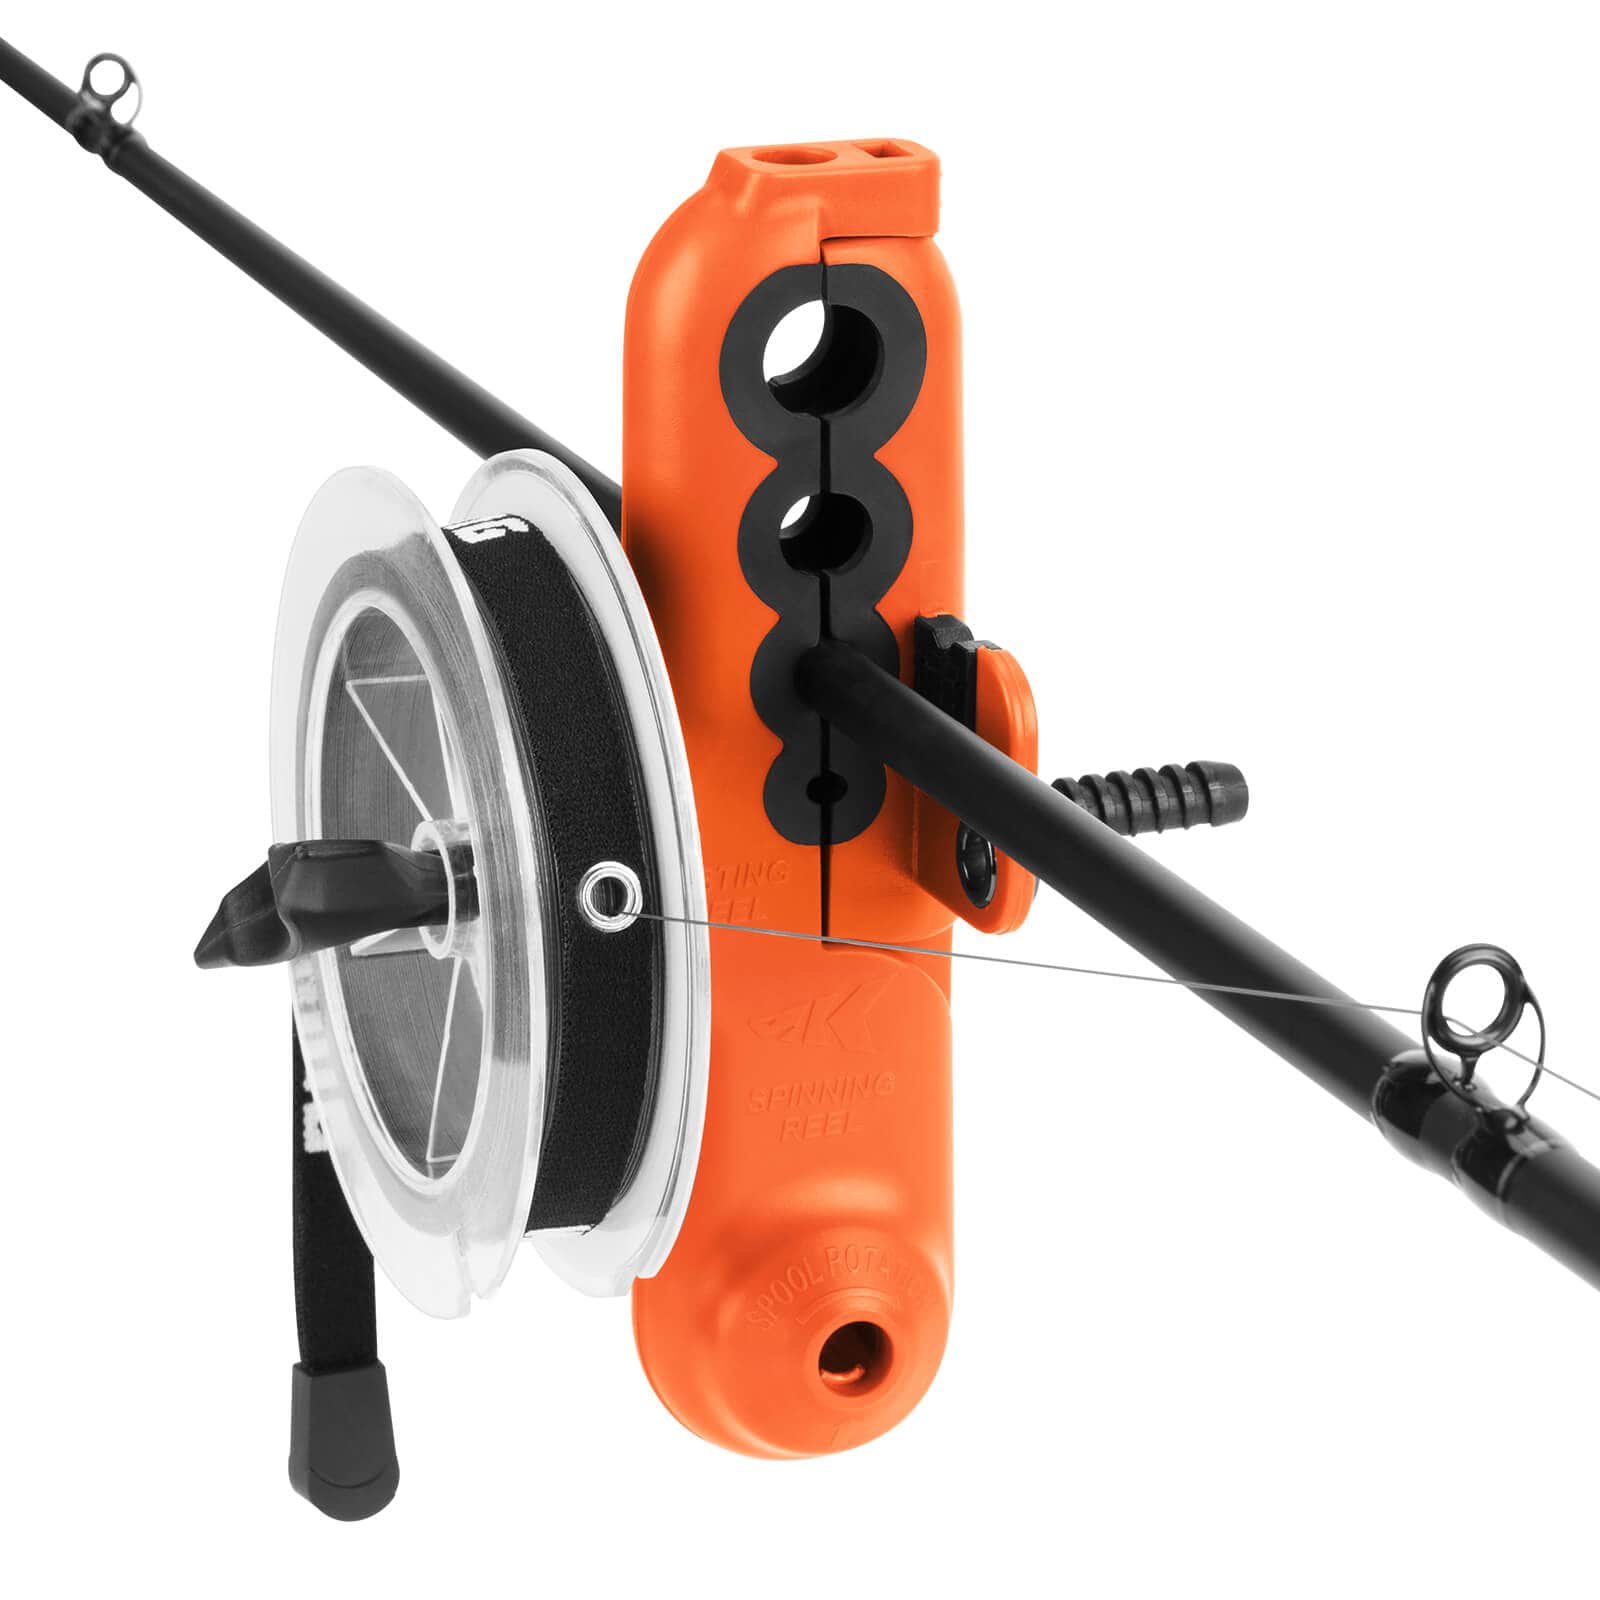 This Fishing Line Spooler Will Make Your Life Easier—And It's On